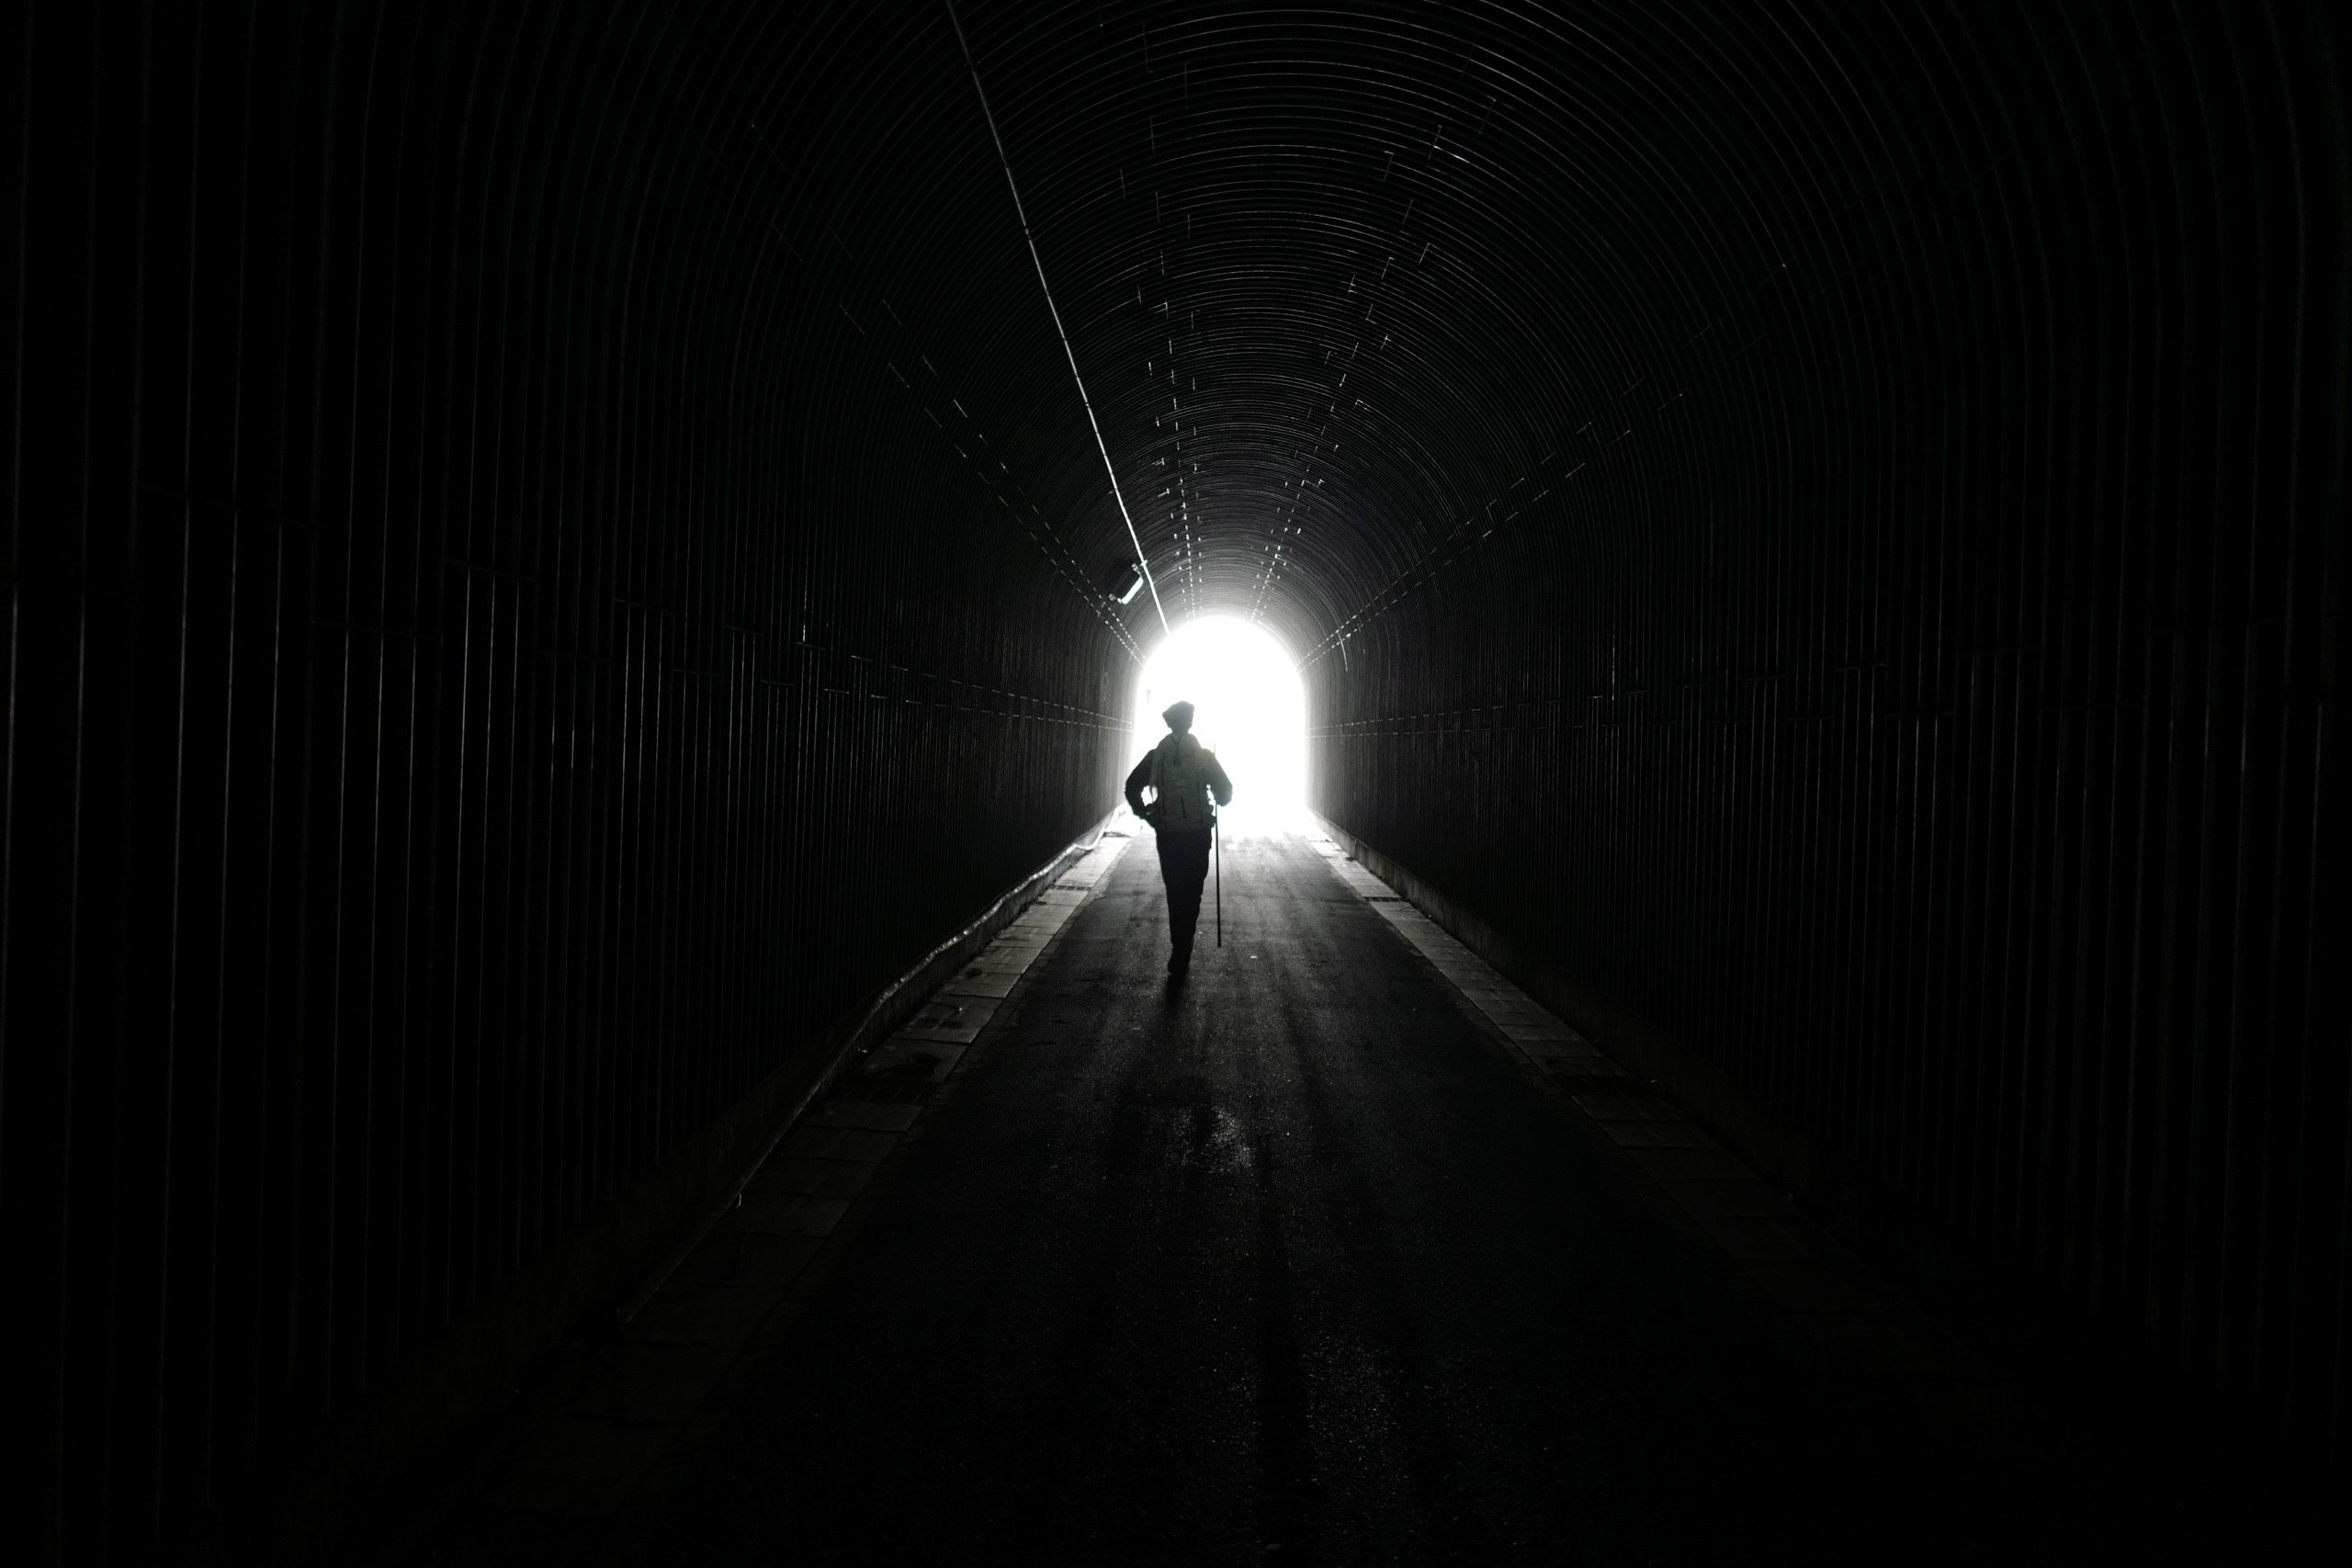 The silhouette of a man with a walking stick, the author, walking through a tunnel.